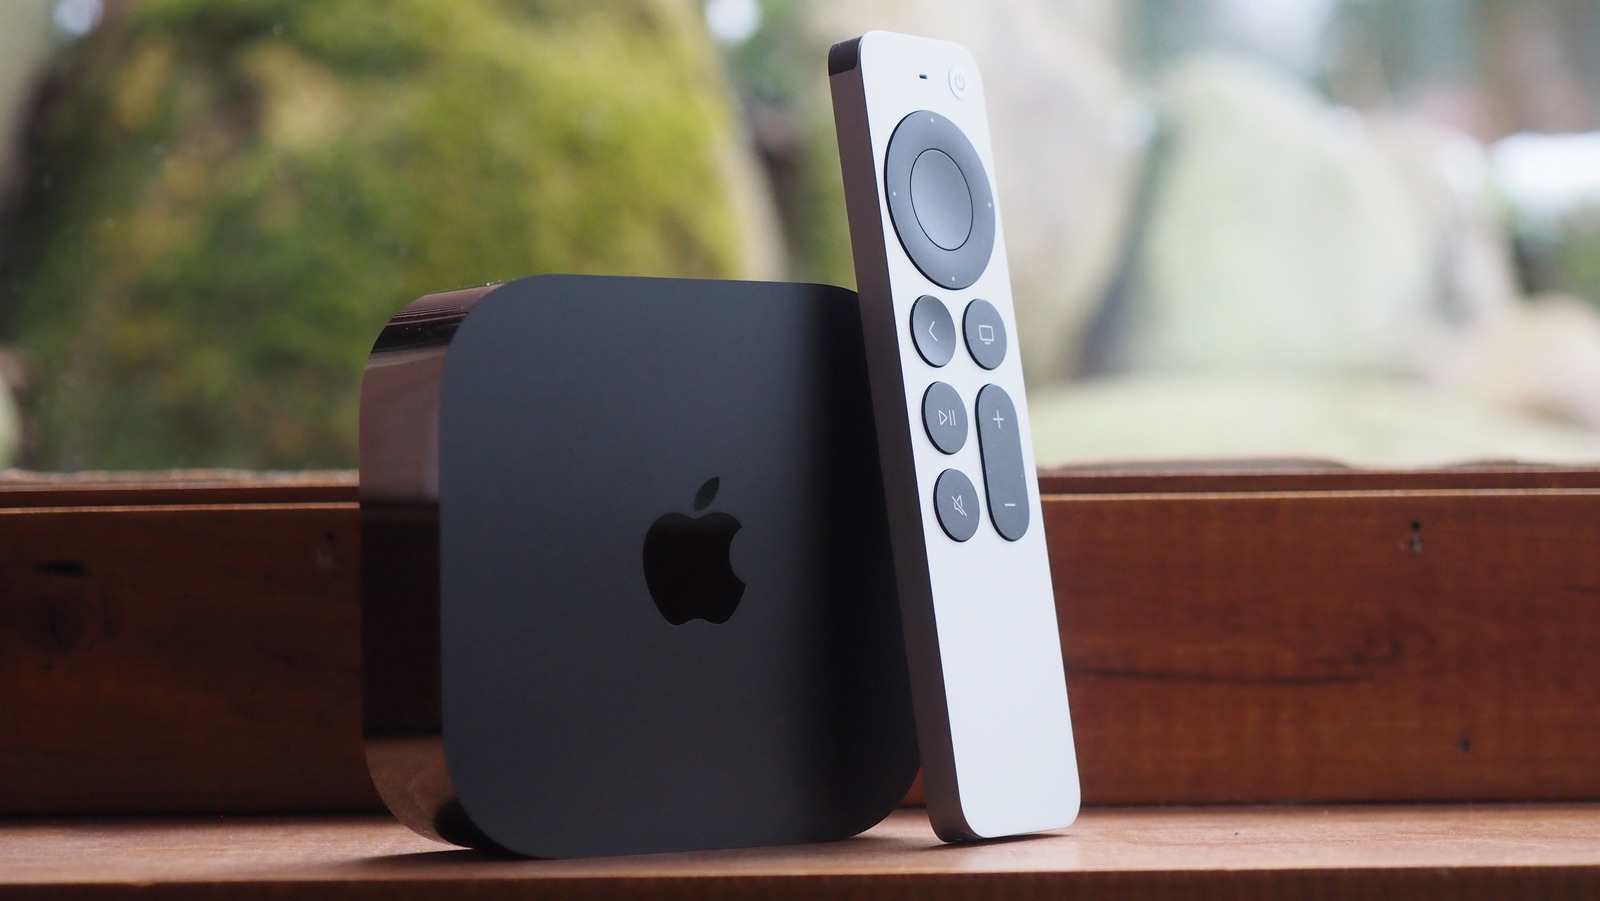 Worth Why More TV Paying Is 4K It Apple (3rd Review Generation):